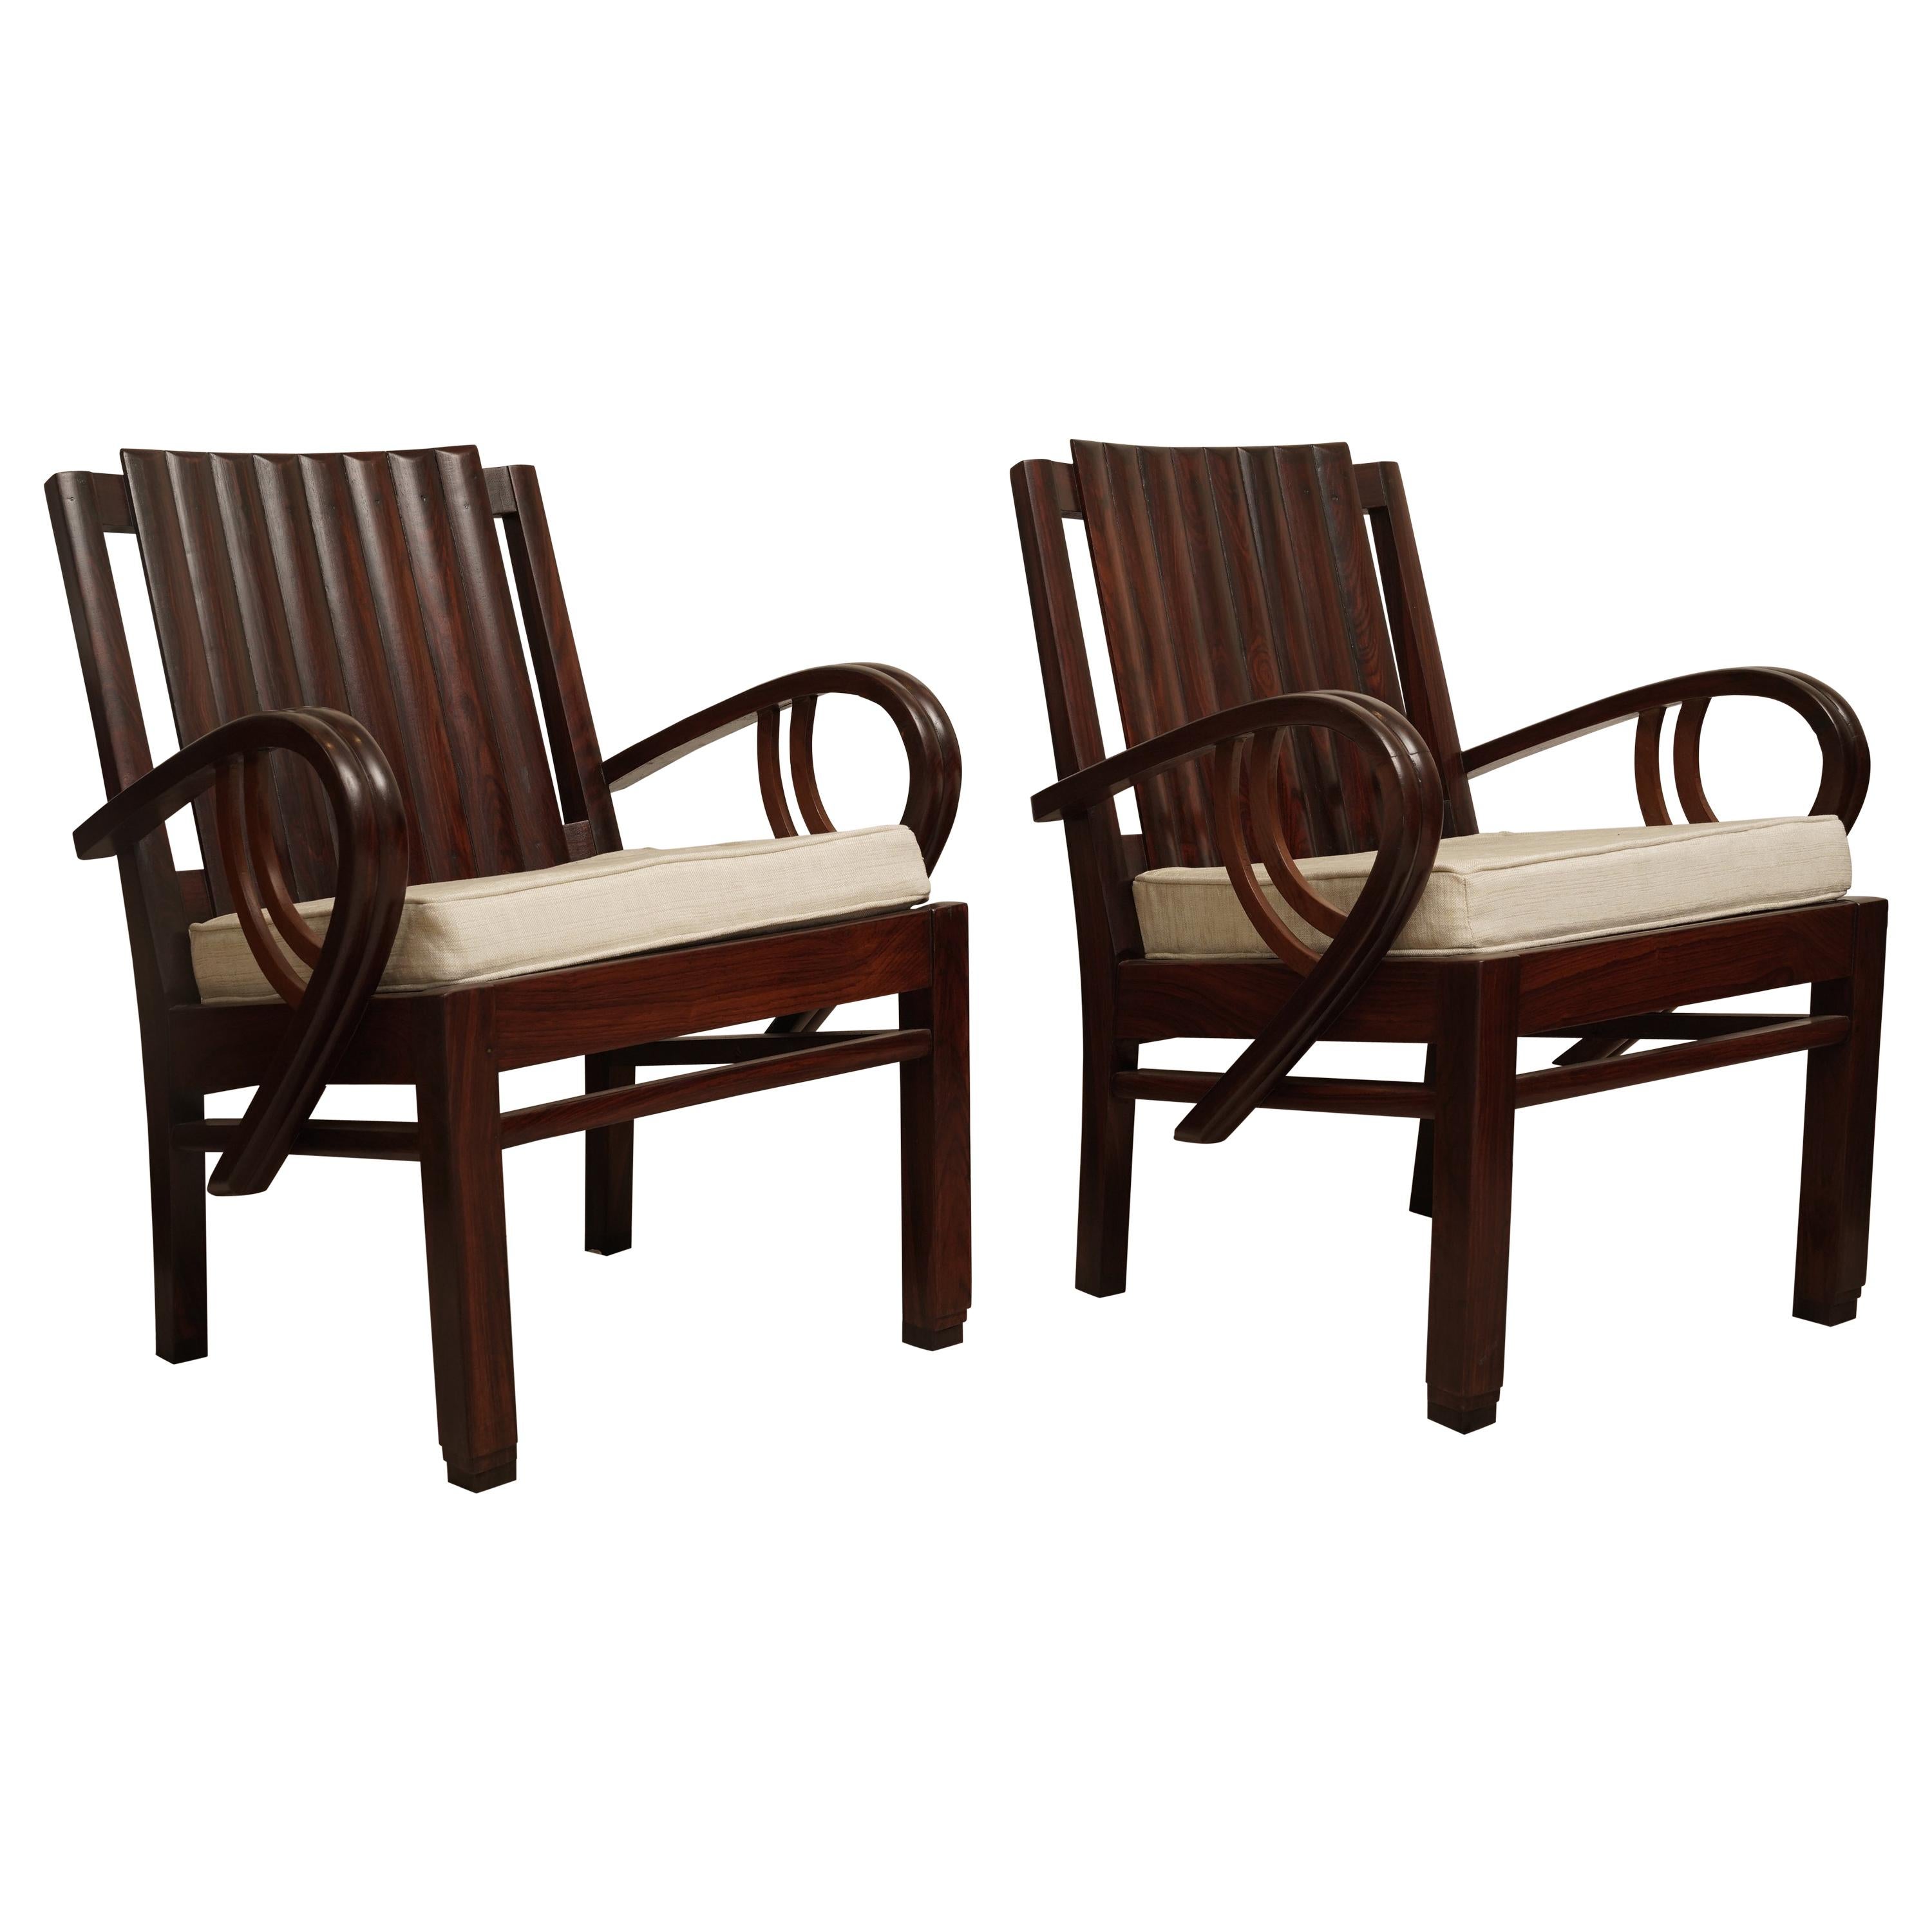 Art Deco Rosewood Pair of Chairs with Cushion